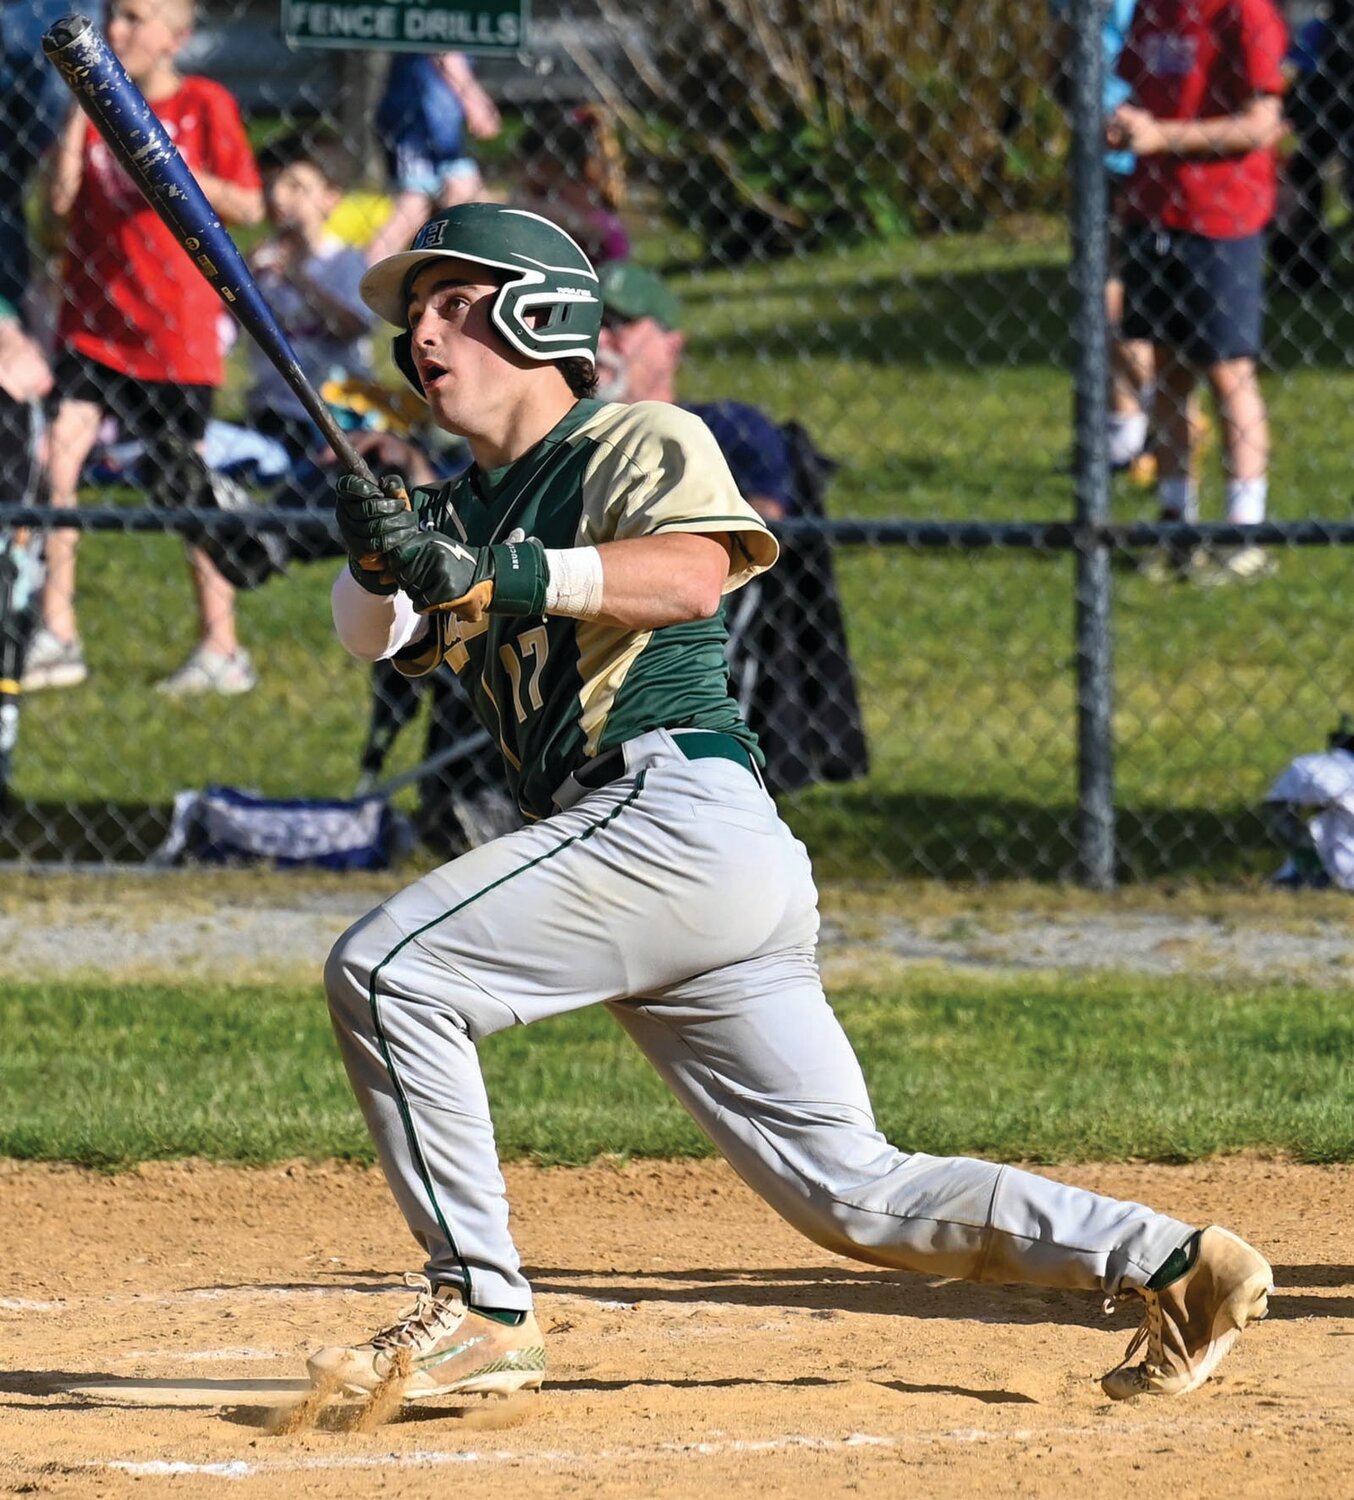 SWINGING AWAY: Hendricken’s Braeden Campbell takes a swing at the plate.